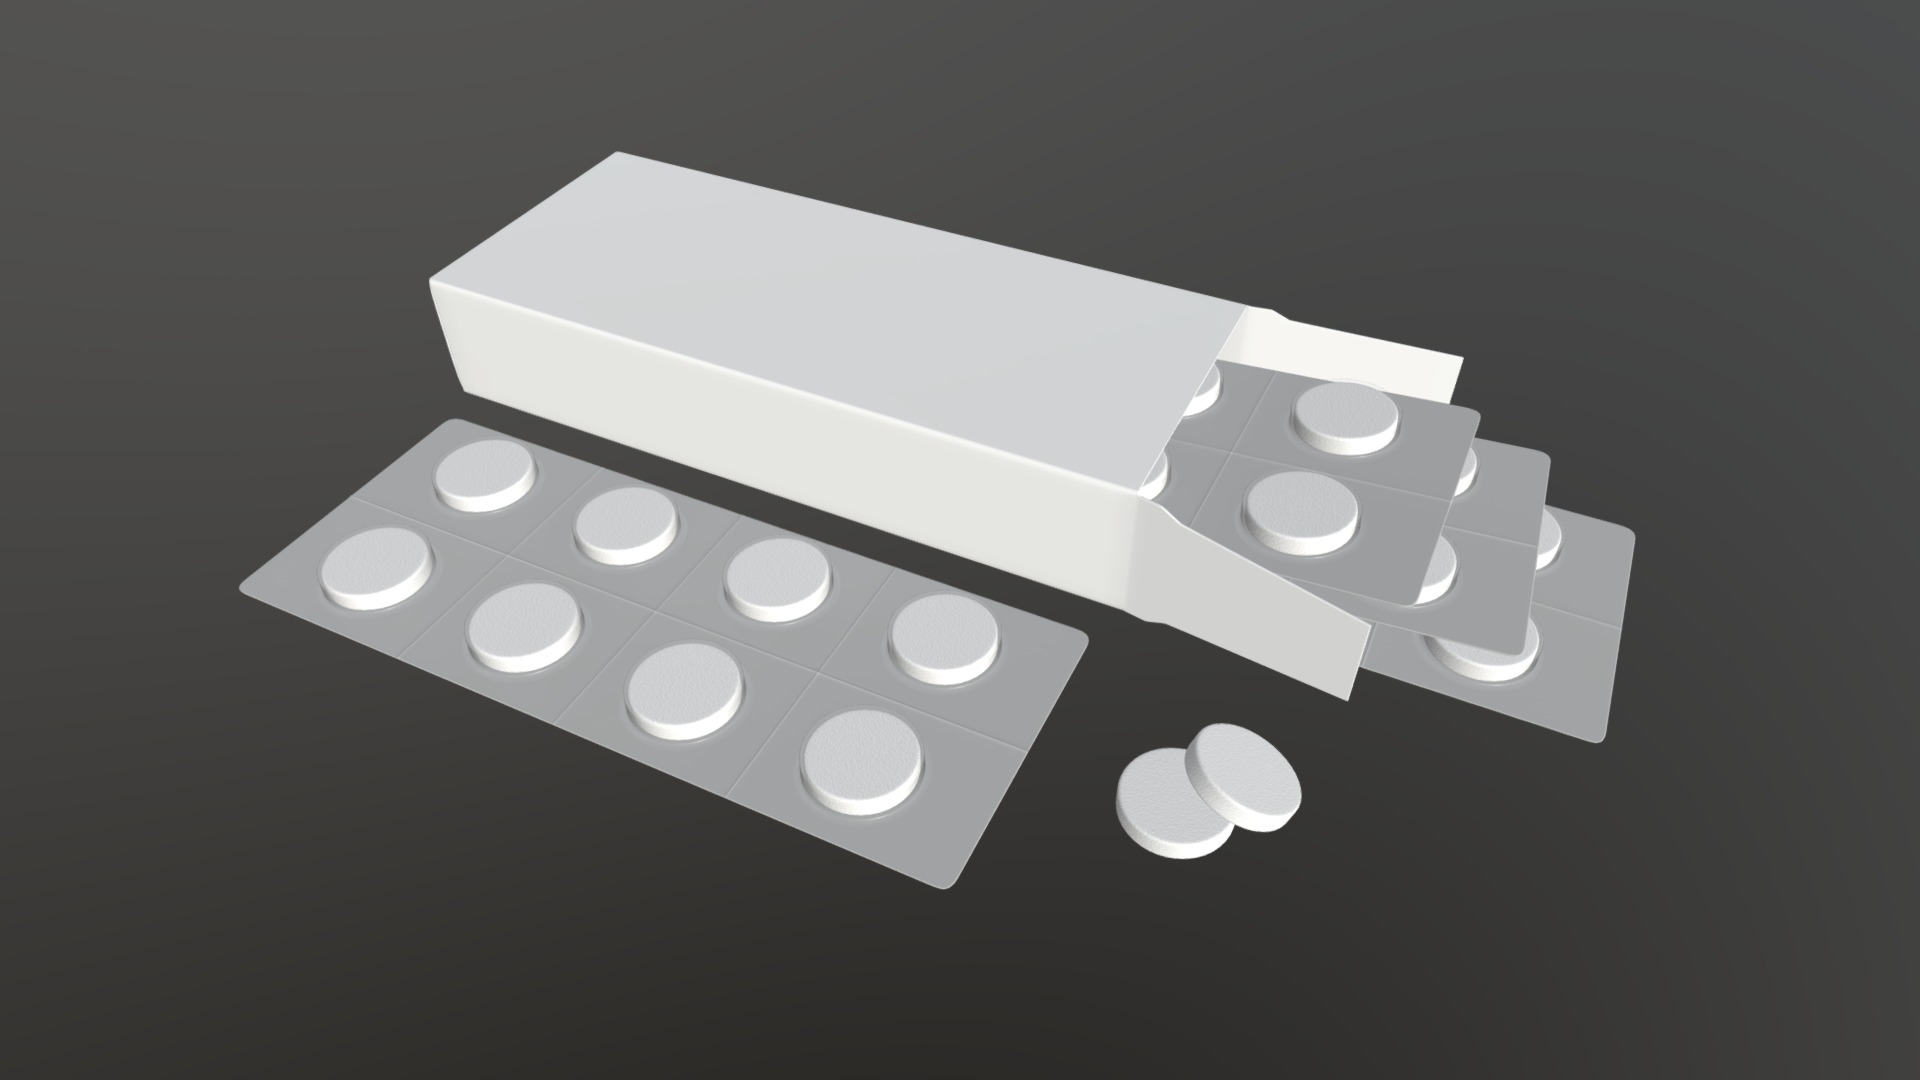 3D model pills in package - This is a 3D model of the pills in package. The 3D model is about a white box with white circles.